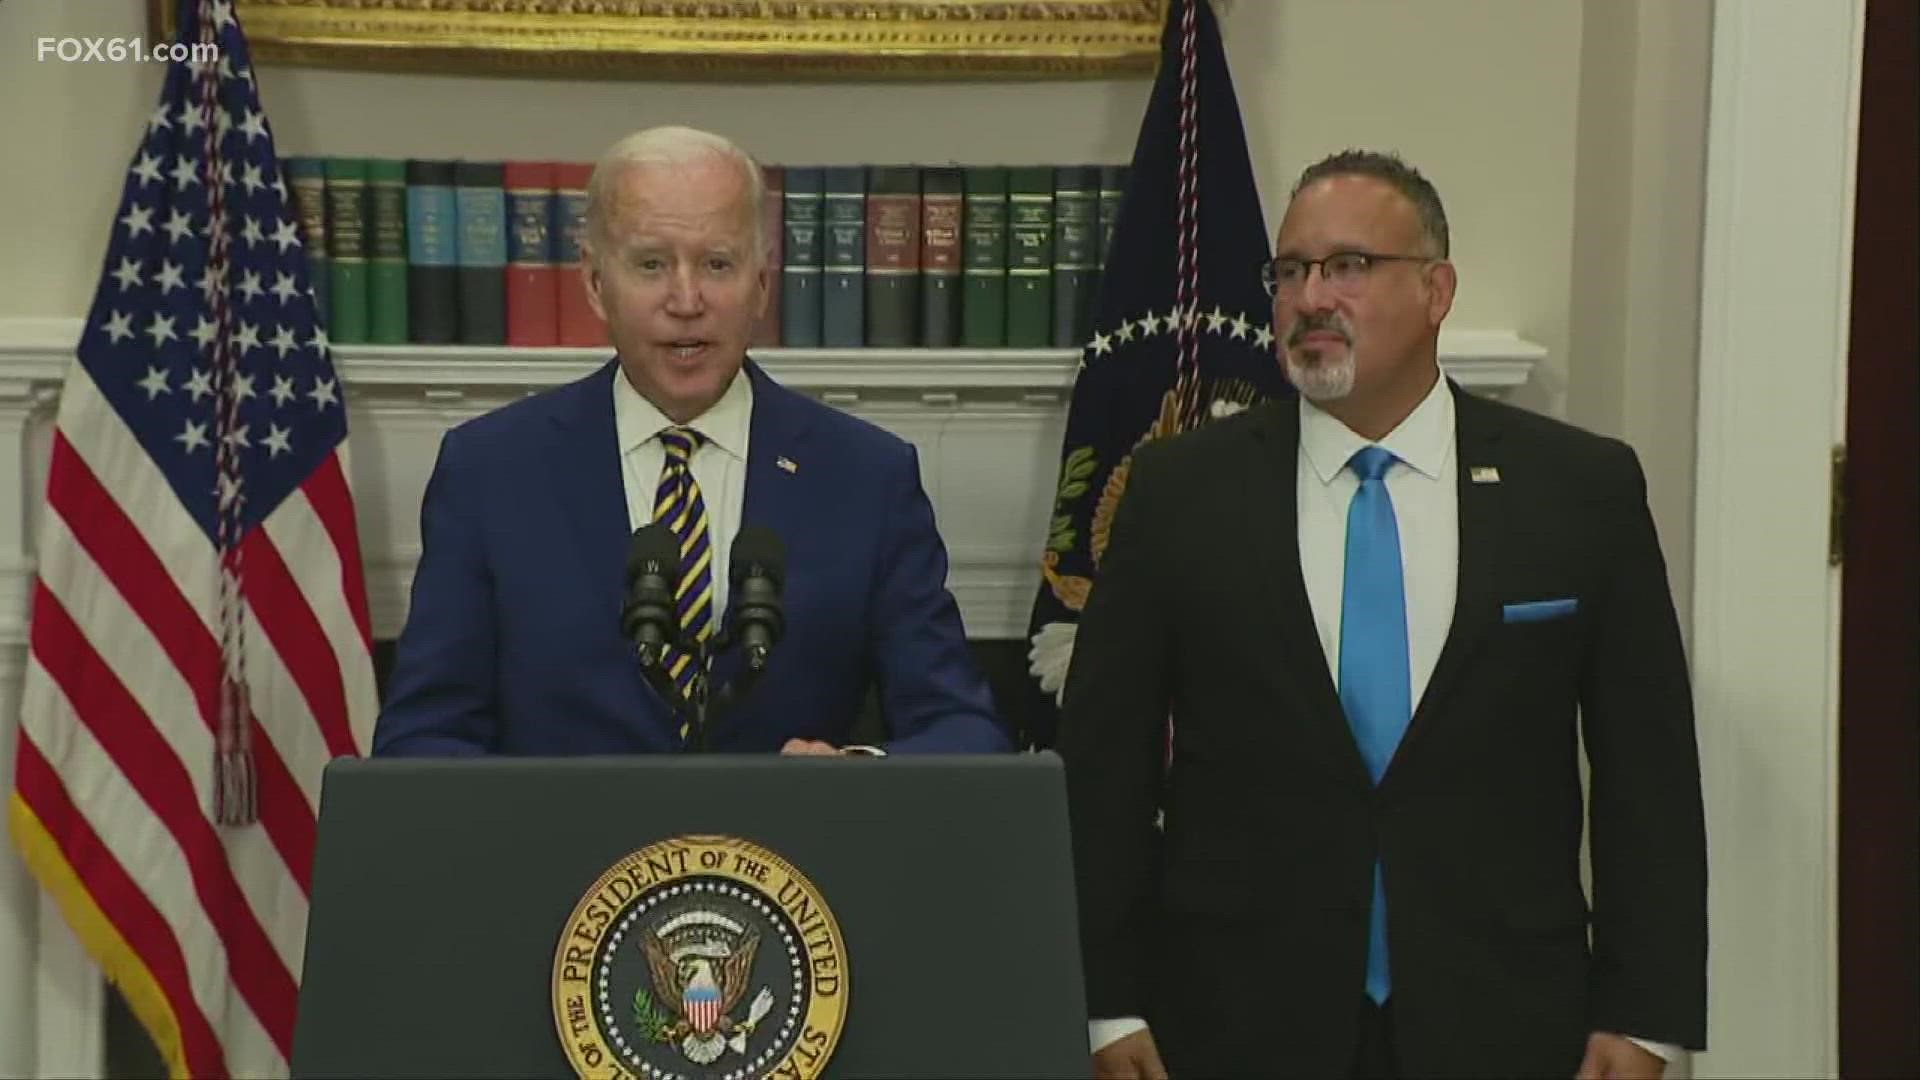 Biden in his plan said that he'd extend the deadline to pay federal student loans until December 31.